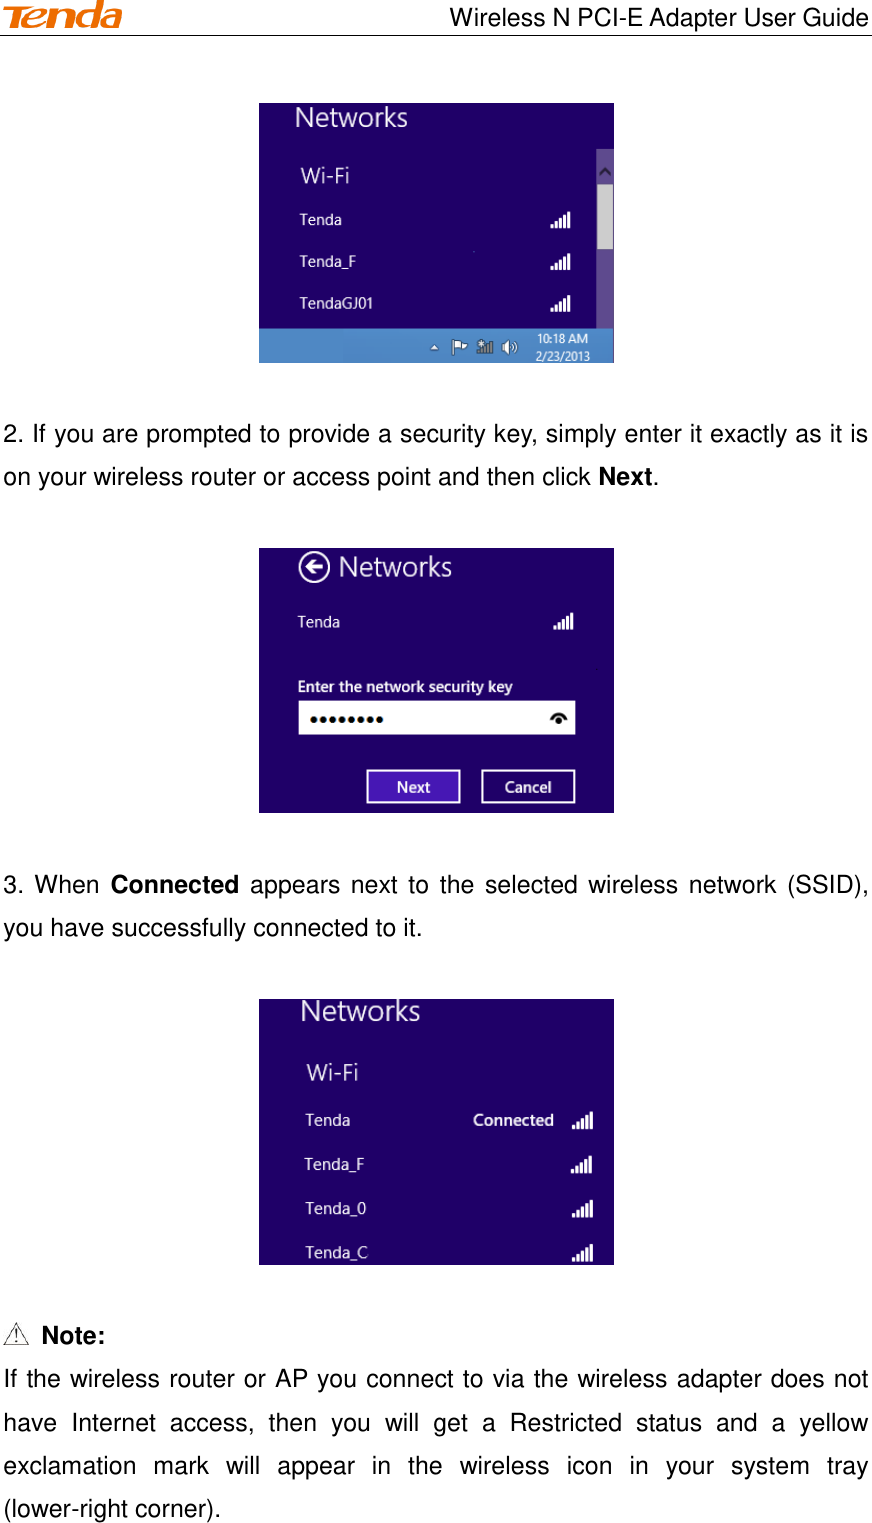                                    Wireless N PCI-E Adapter User Guide   2. If you are prompted to provide a security key, simply enter it exactly as it is on your wireless router or access point and then click Next.    3. When Connected appears next to the selected wireless network (SSID), you have successfully connected to it.      Note: If the wireless router or AP you connect to via the wireless adapter does not have  Internet  access,  then  you  will  get  a  Restricted  status  and  a  yellow exclamation  mark  will  appear  in  the  wireless  icon  in  your  system  tray (lower-right corner). 